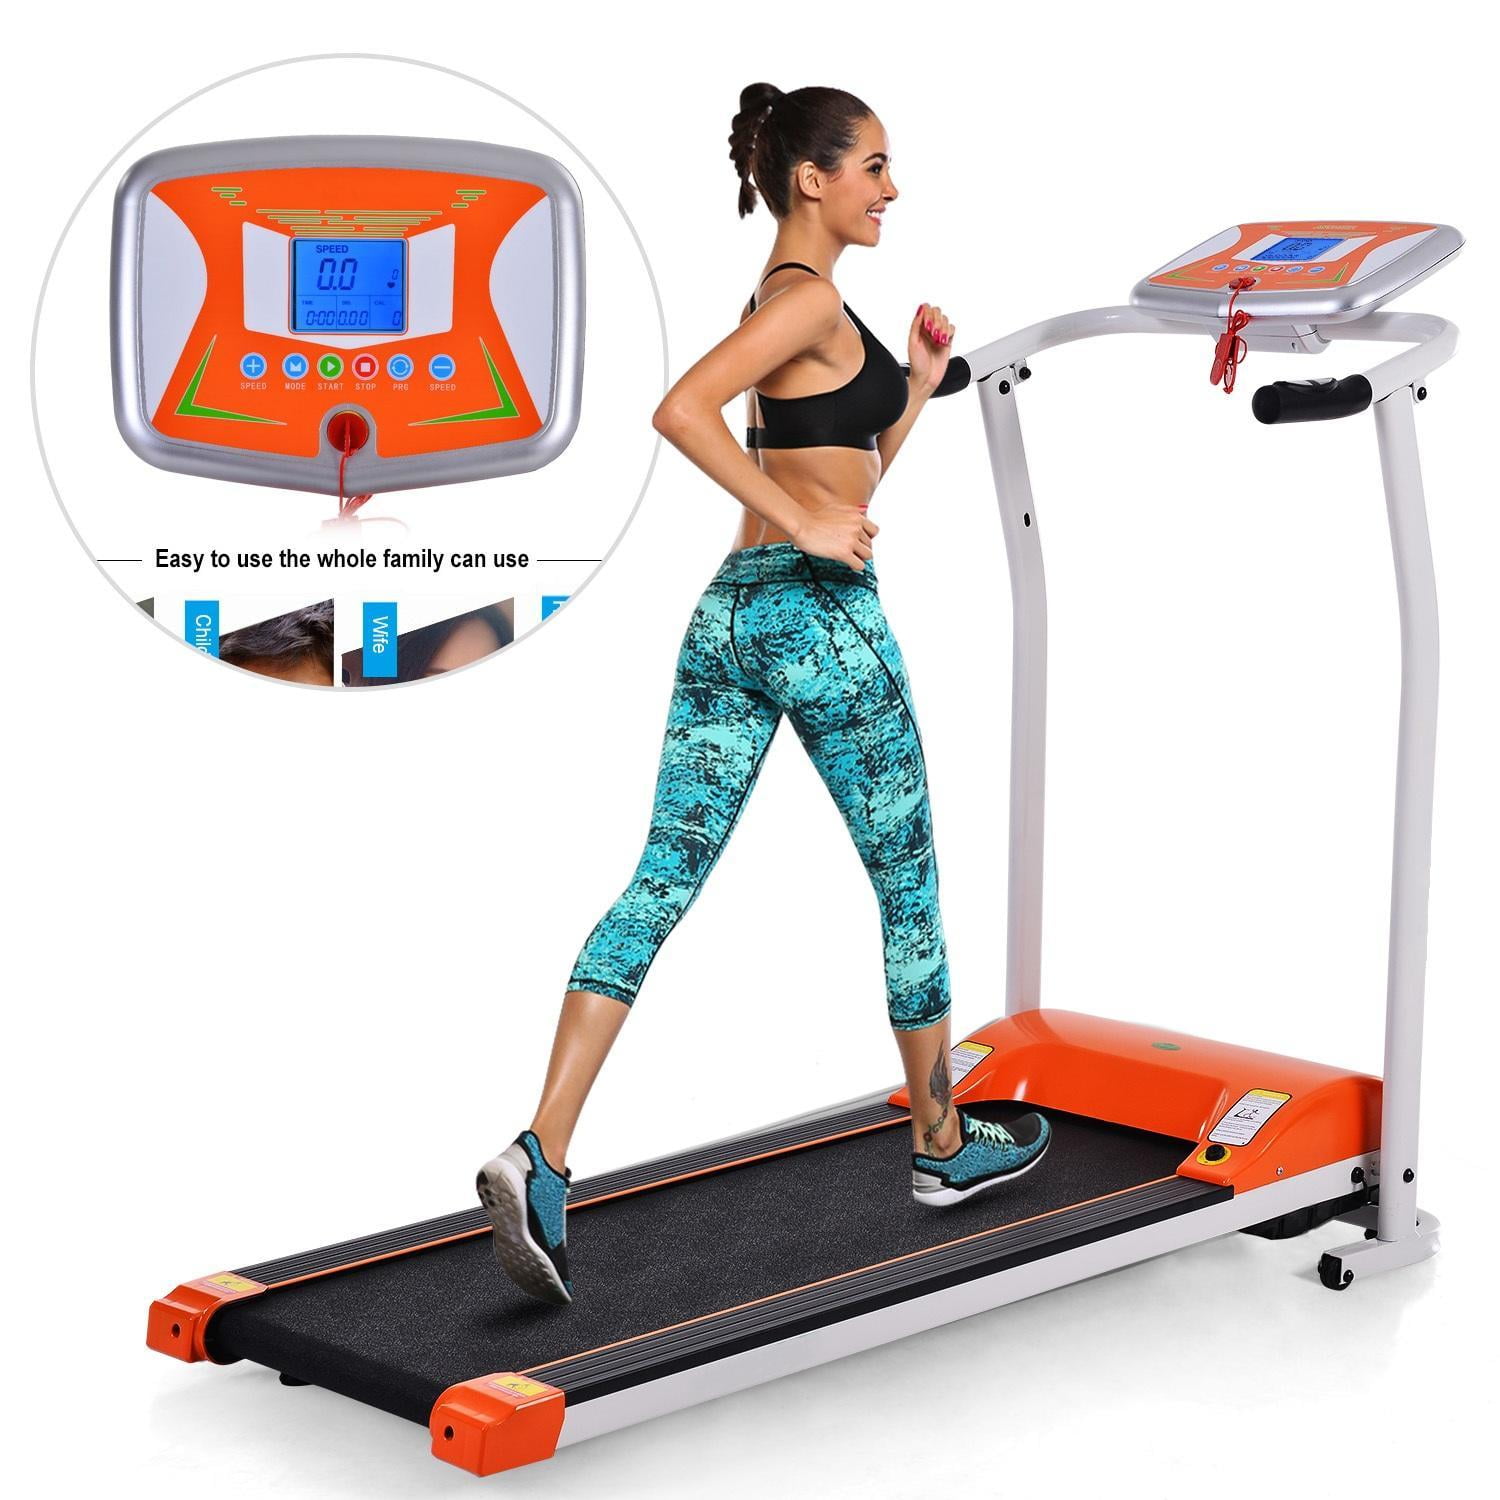 HQ Motorized Electric Folding Treadmill Jogging Running Machine with PAD Holder 